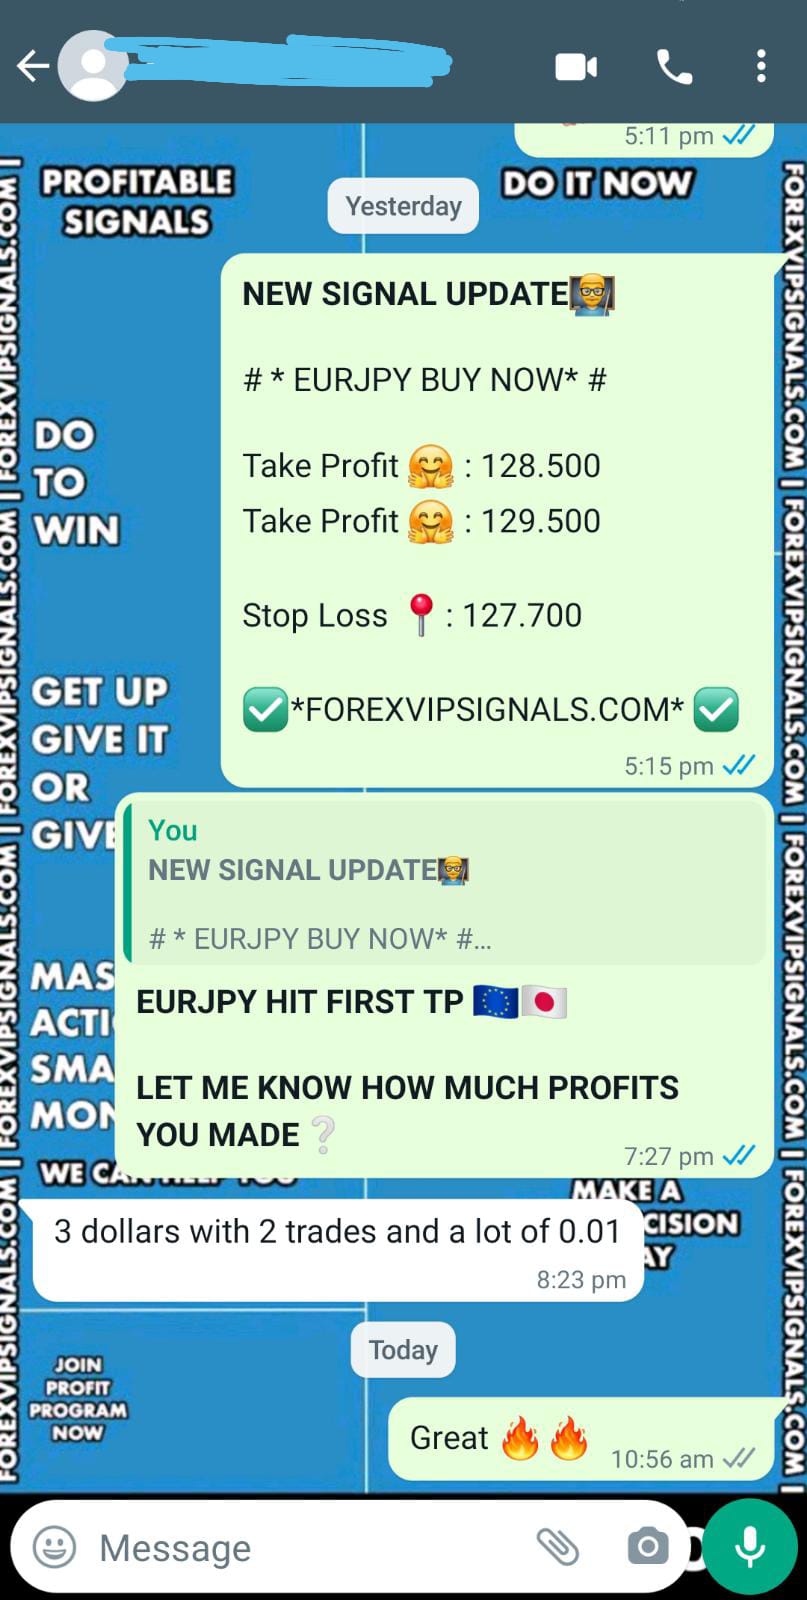 4x trading with forex vip signals